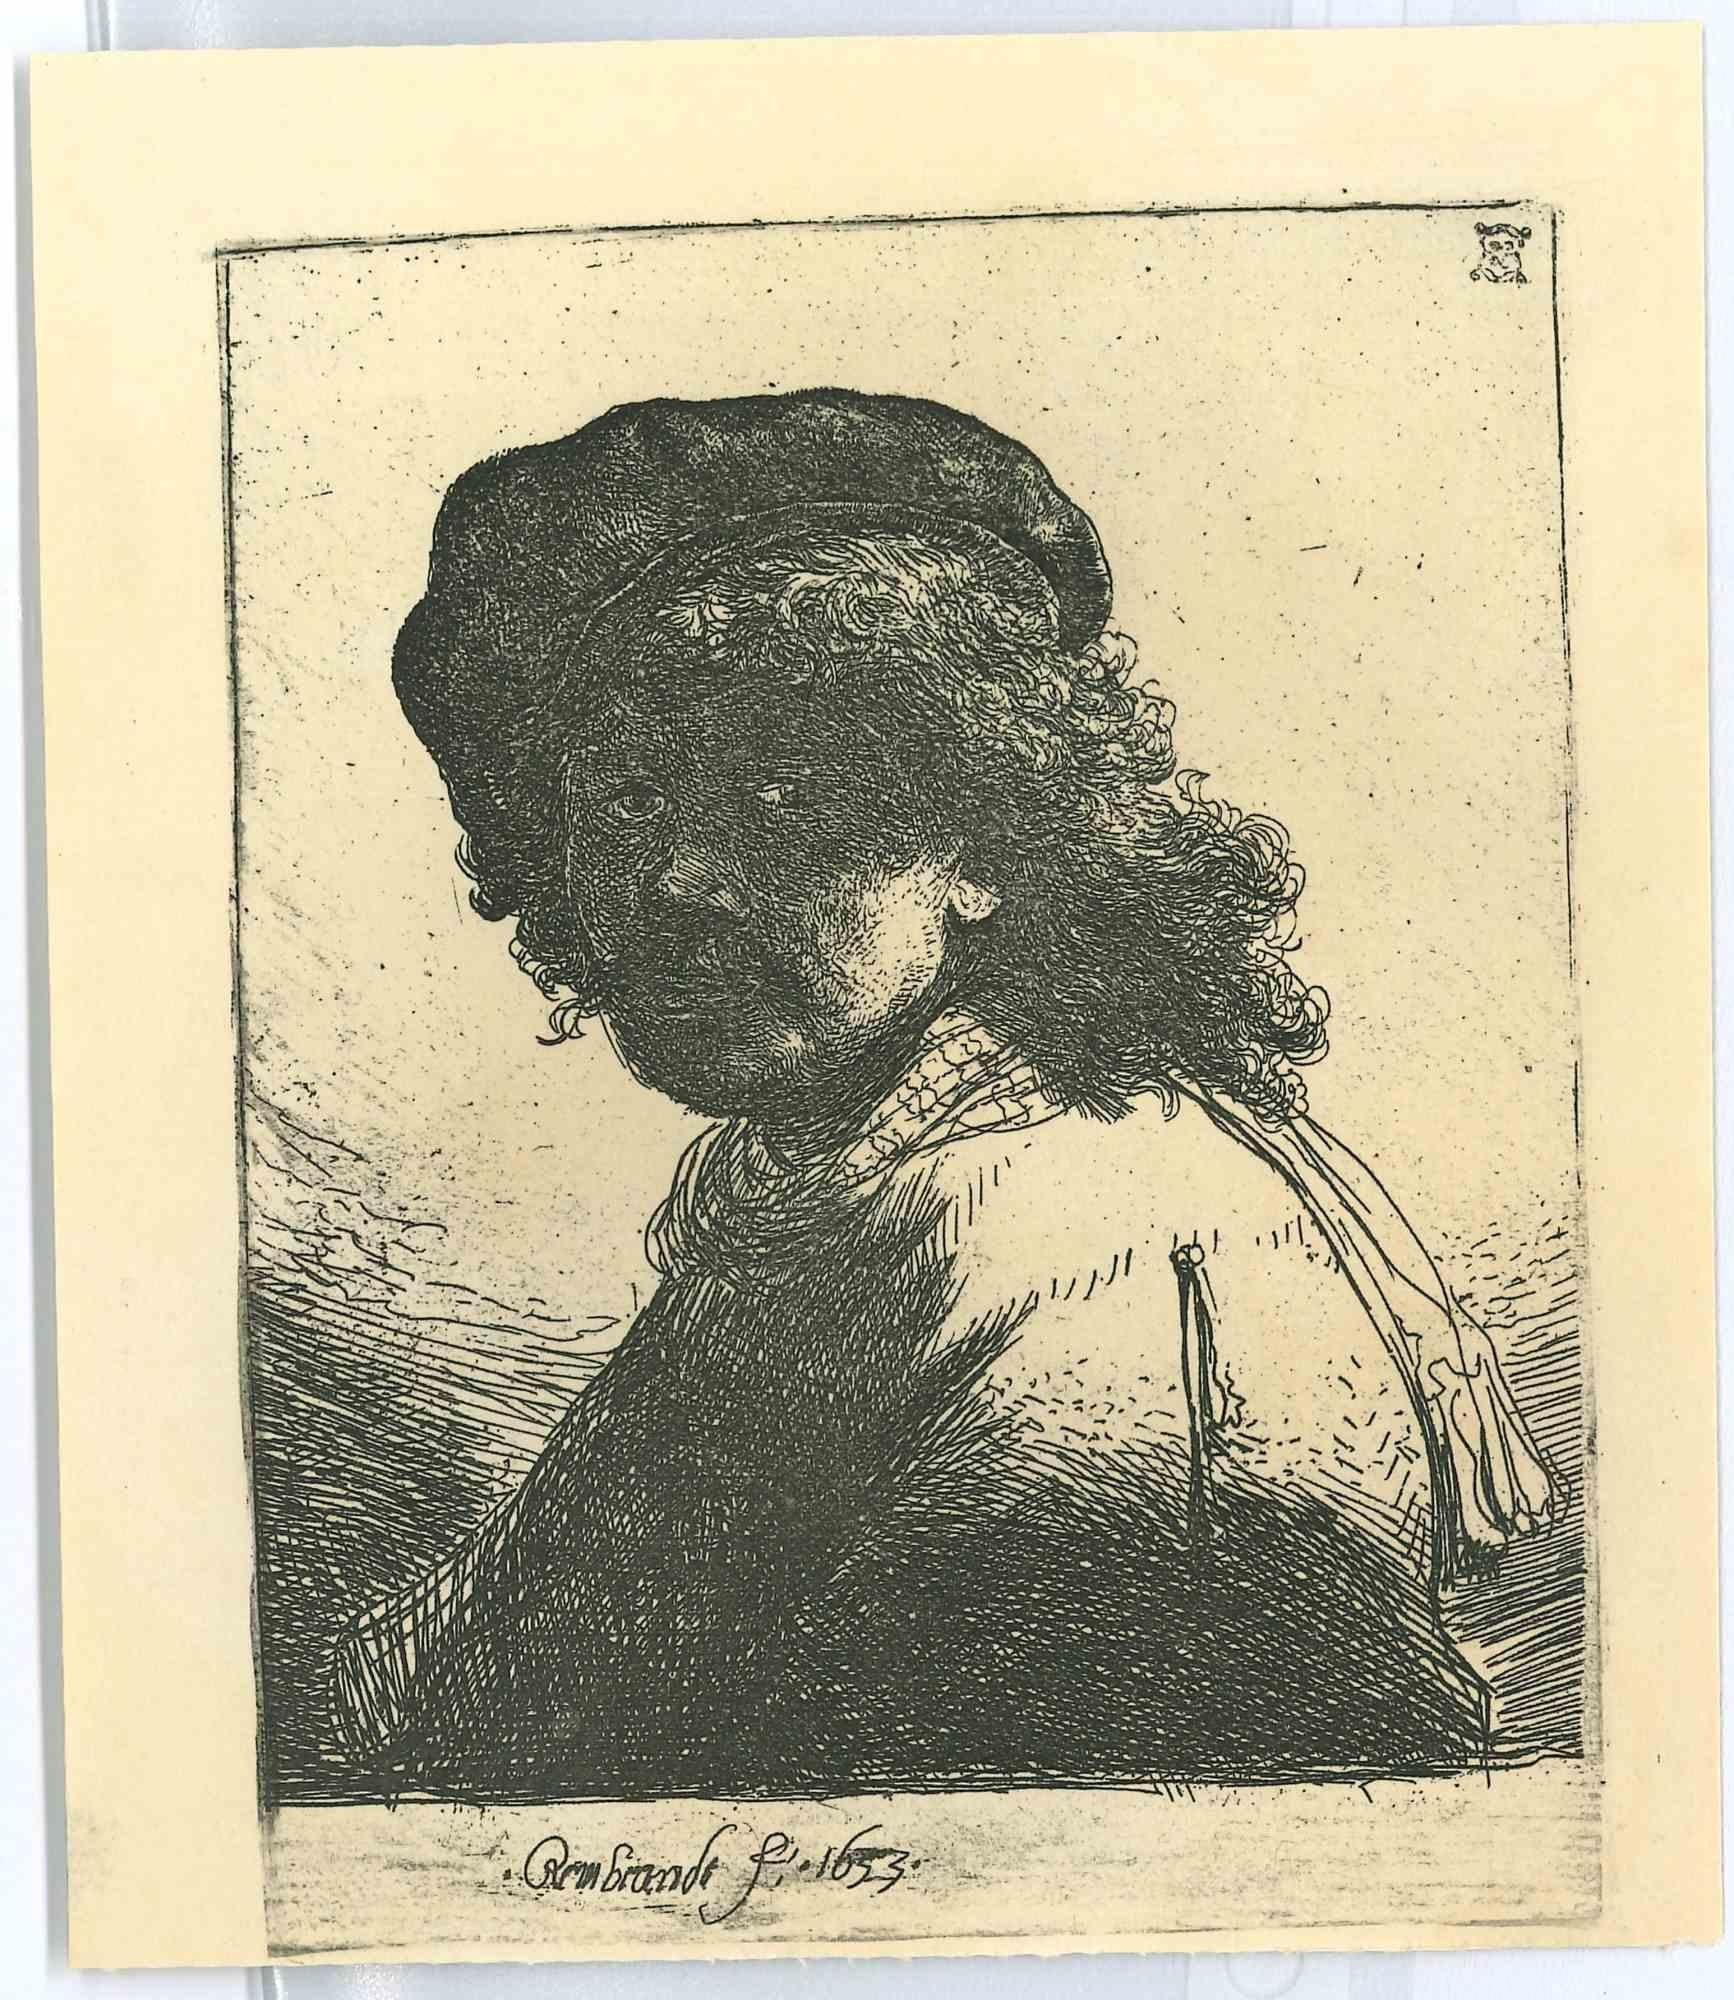 Charles Amand Durand Figurative Print - Self-Portrait with a Scarf Around His Neck-Engraving after Rembrandt- 19th Cent.